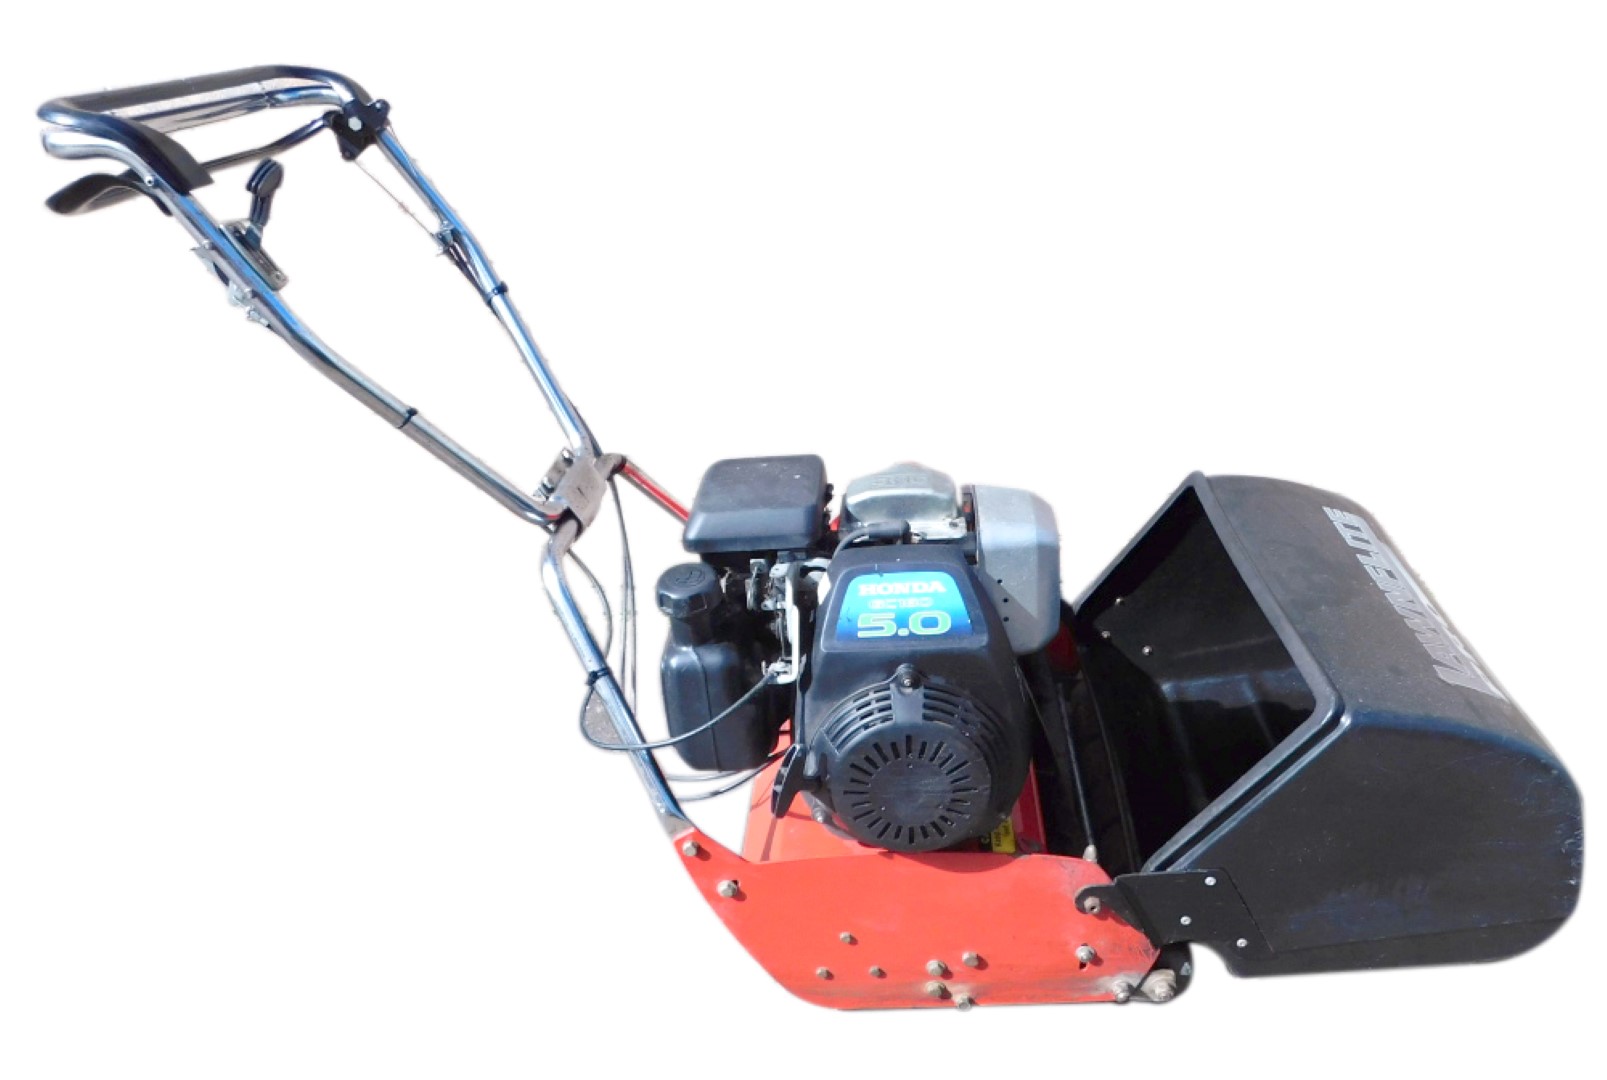 A Lawnflite Pro cylinder mower, with Honda GC160 5.0 engine.